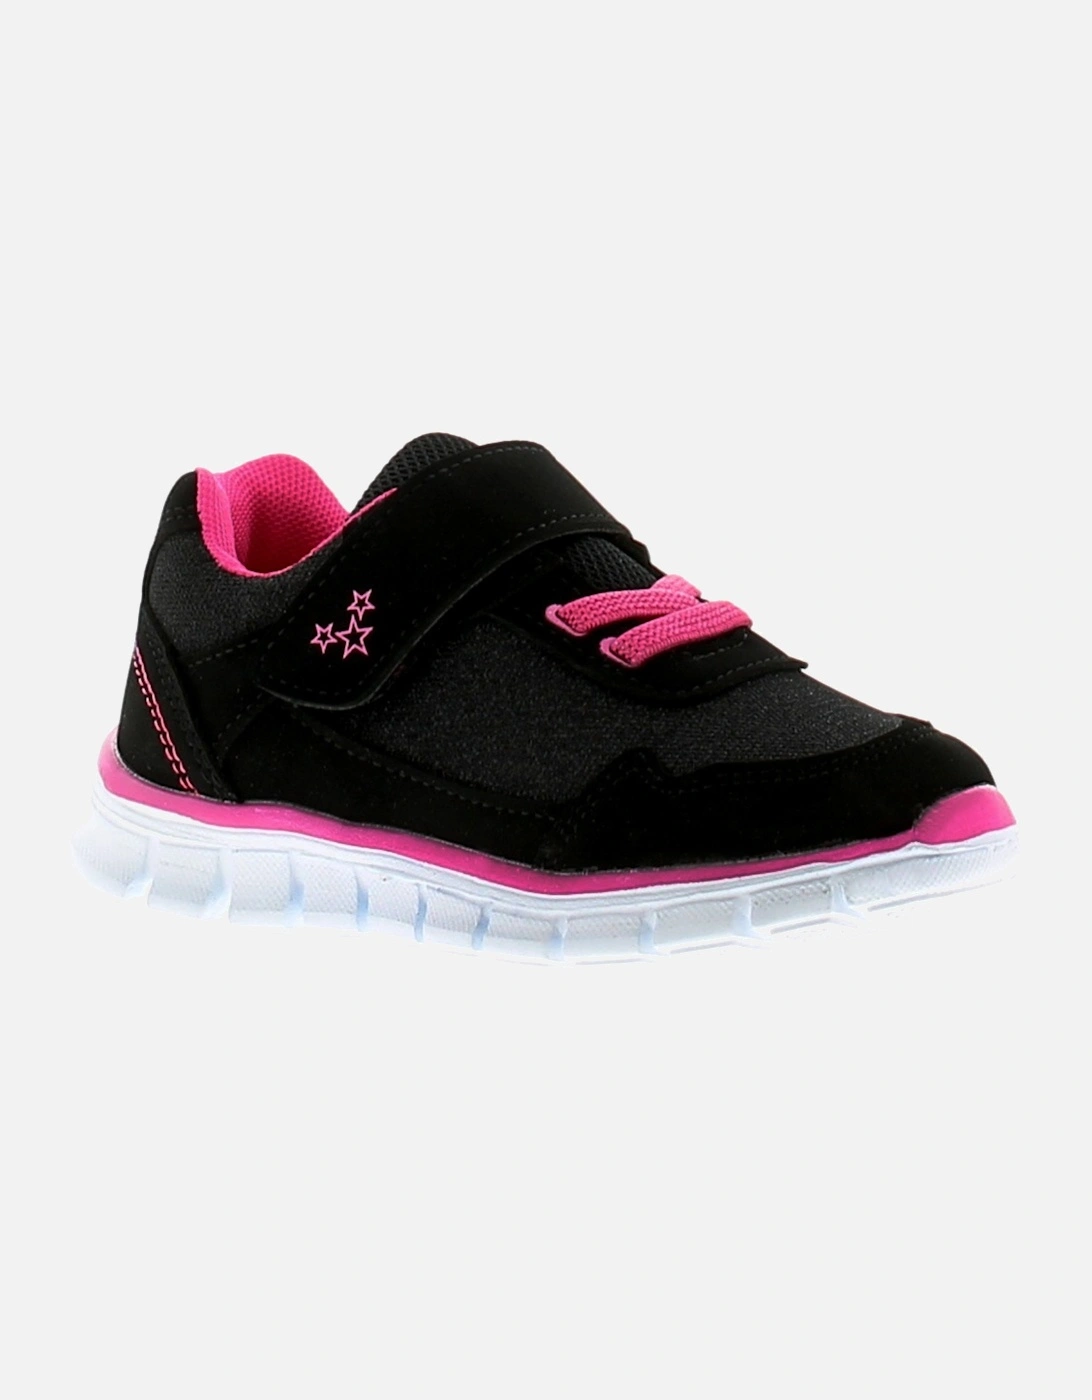 Infants Girls Trainers nina Touch Fastening black pink UK Size, 6 of 5